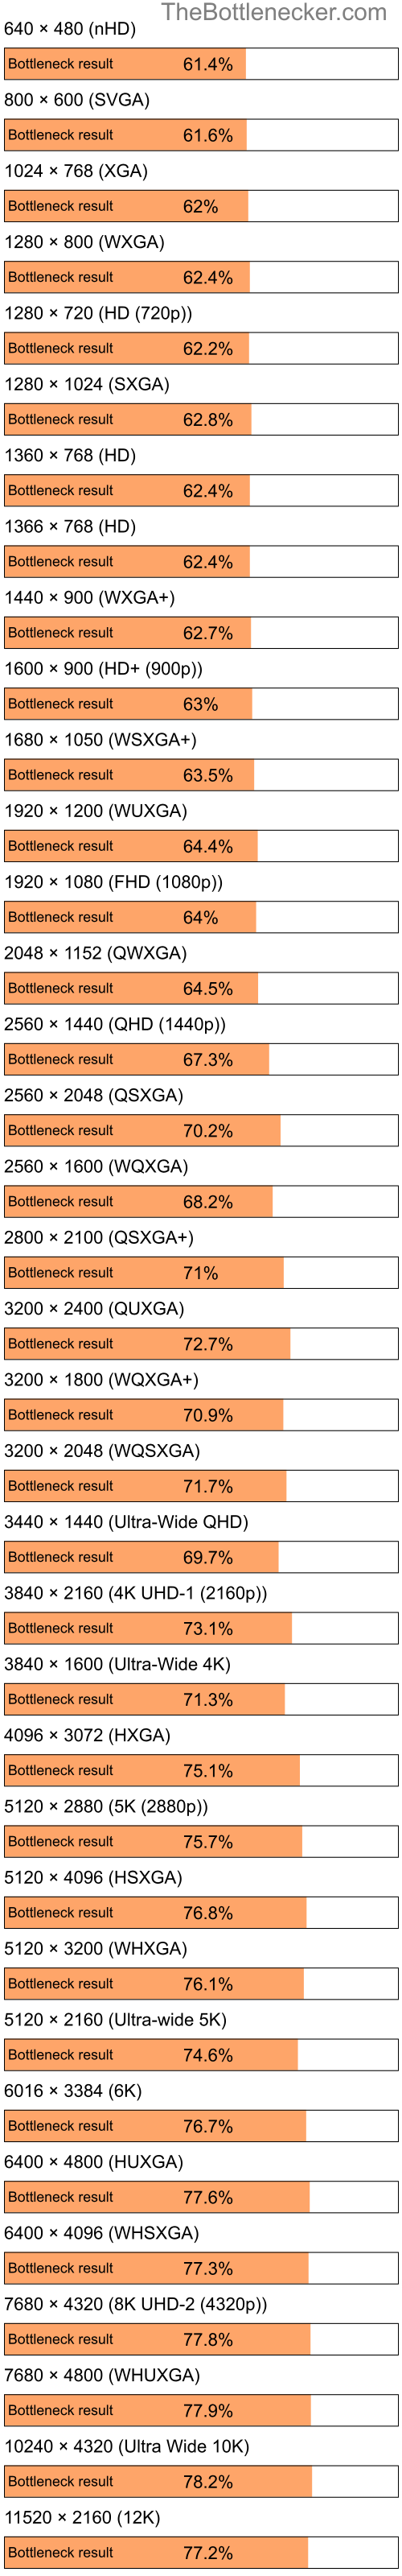 Bottleneck results by resolution for Intel Pentium 4 and AMD Mobility Radeon HD 3470 in7 Days to Die